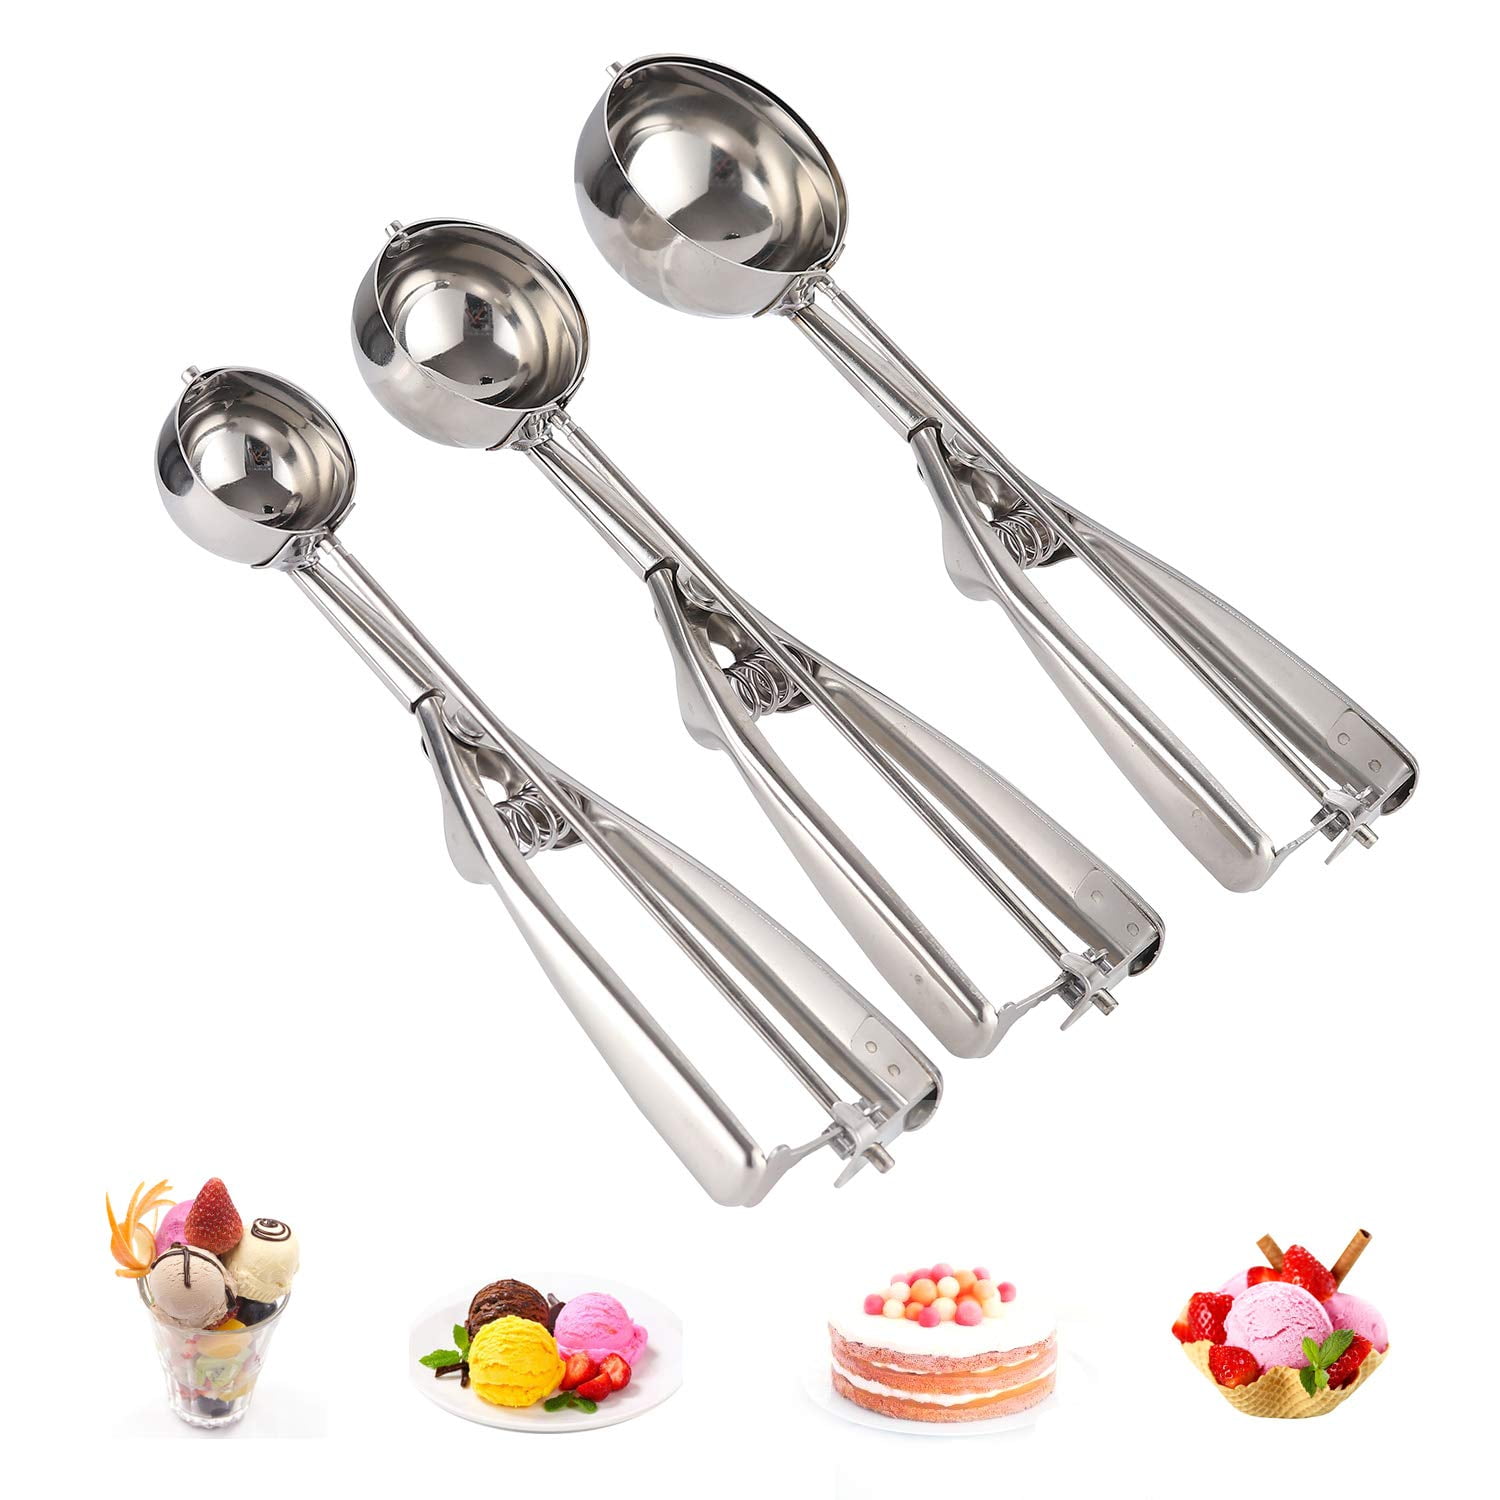 21.5cm 3 PCS Stainless Steel Ice Cream Scoop Trigger Include Small Size（20.5cm） ,Large Size Cookie Scoop Set Medium Size Ice Cream Scoop Set 22.5cm 